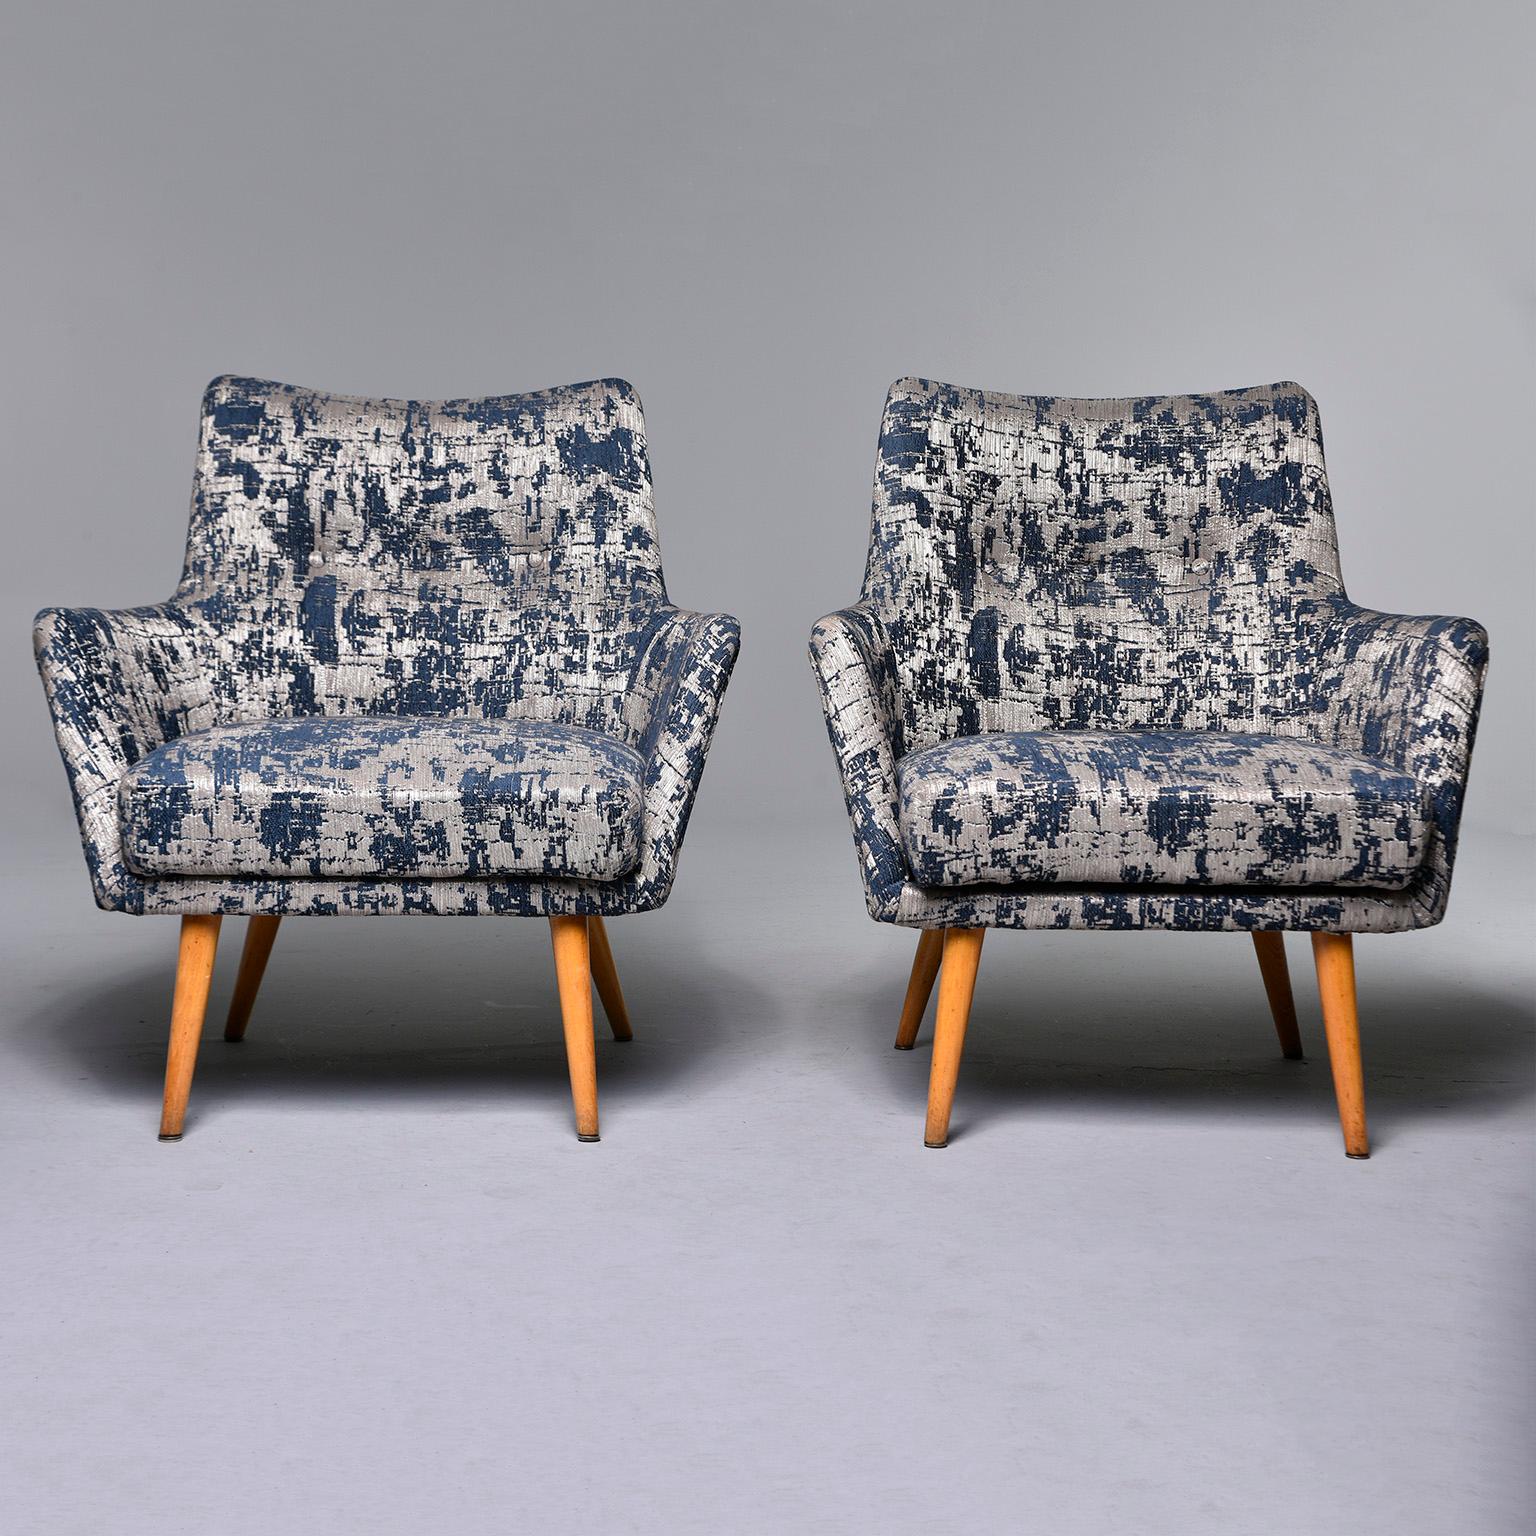 Pair of circa early 1960s Italian armchairs feature tapered beech legs and new upholstery with an abstract woven navy blue and silver pattern and button detail on the seatbacks. Unknown maker. Sold and priced as a pair.

Measures: Arm height 22”,